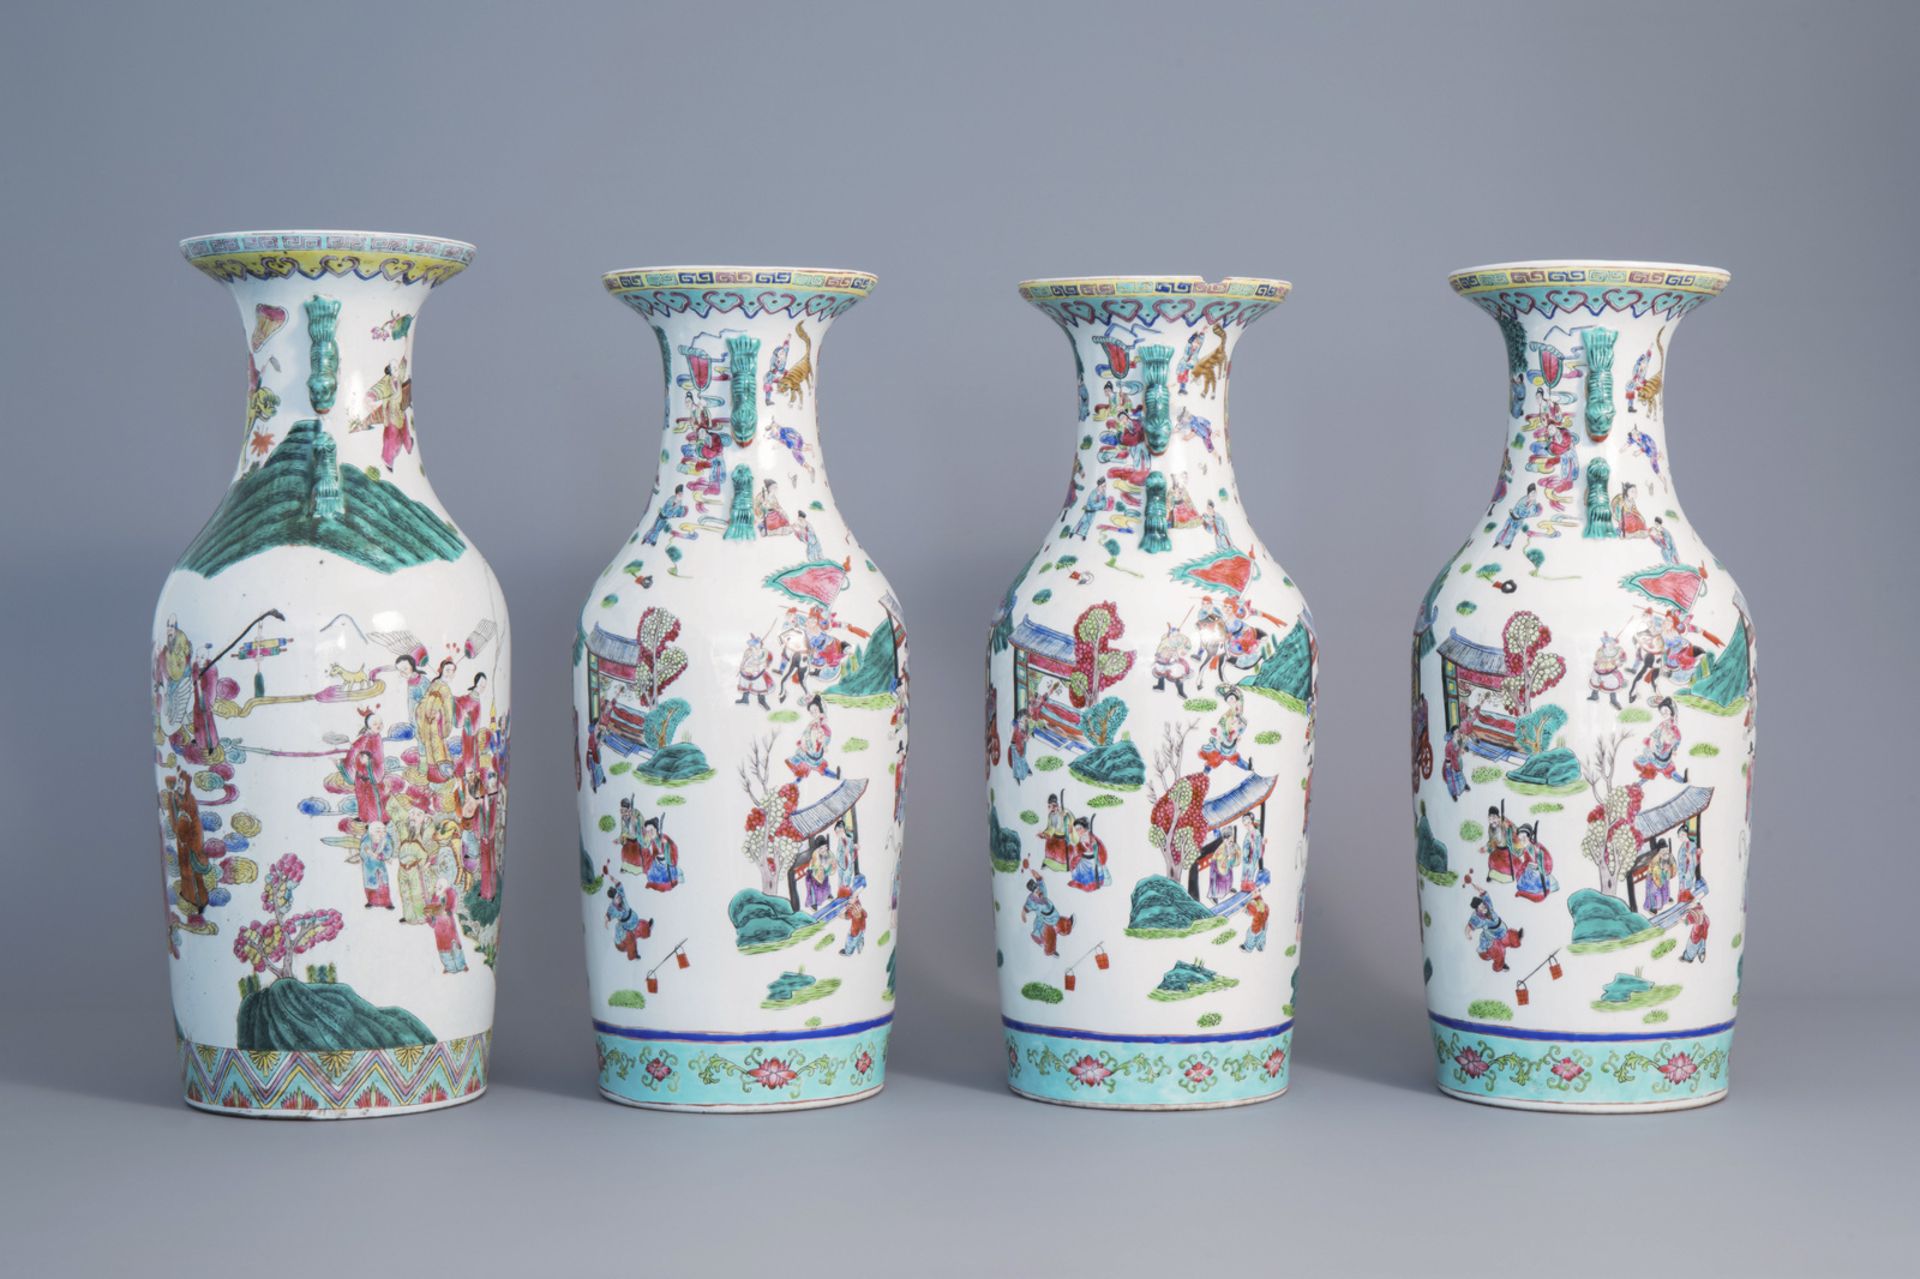 Four Chinese famille rose vases with figurative design all around, 20th C. - Image 4 of 6